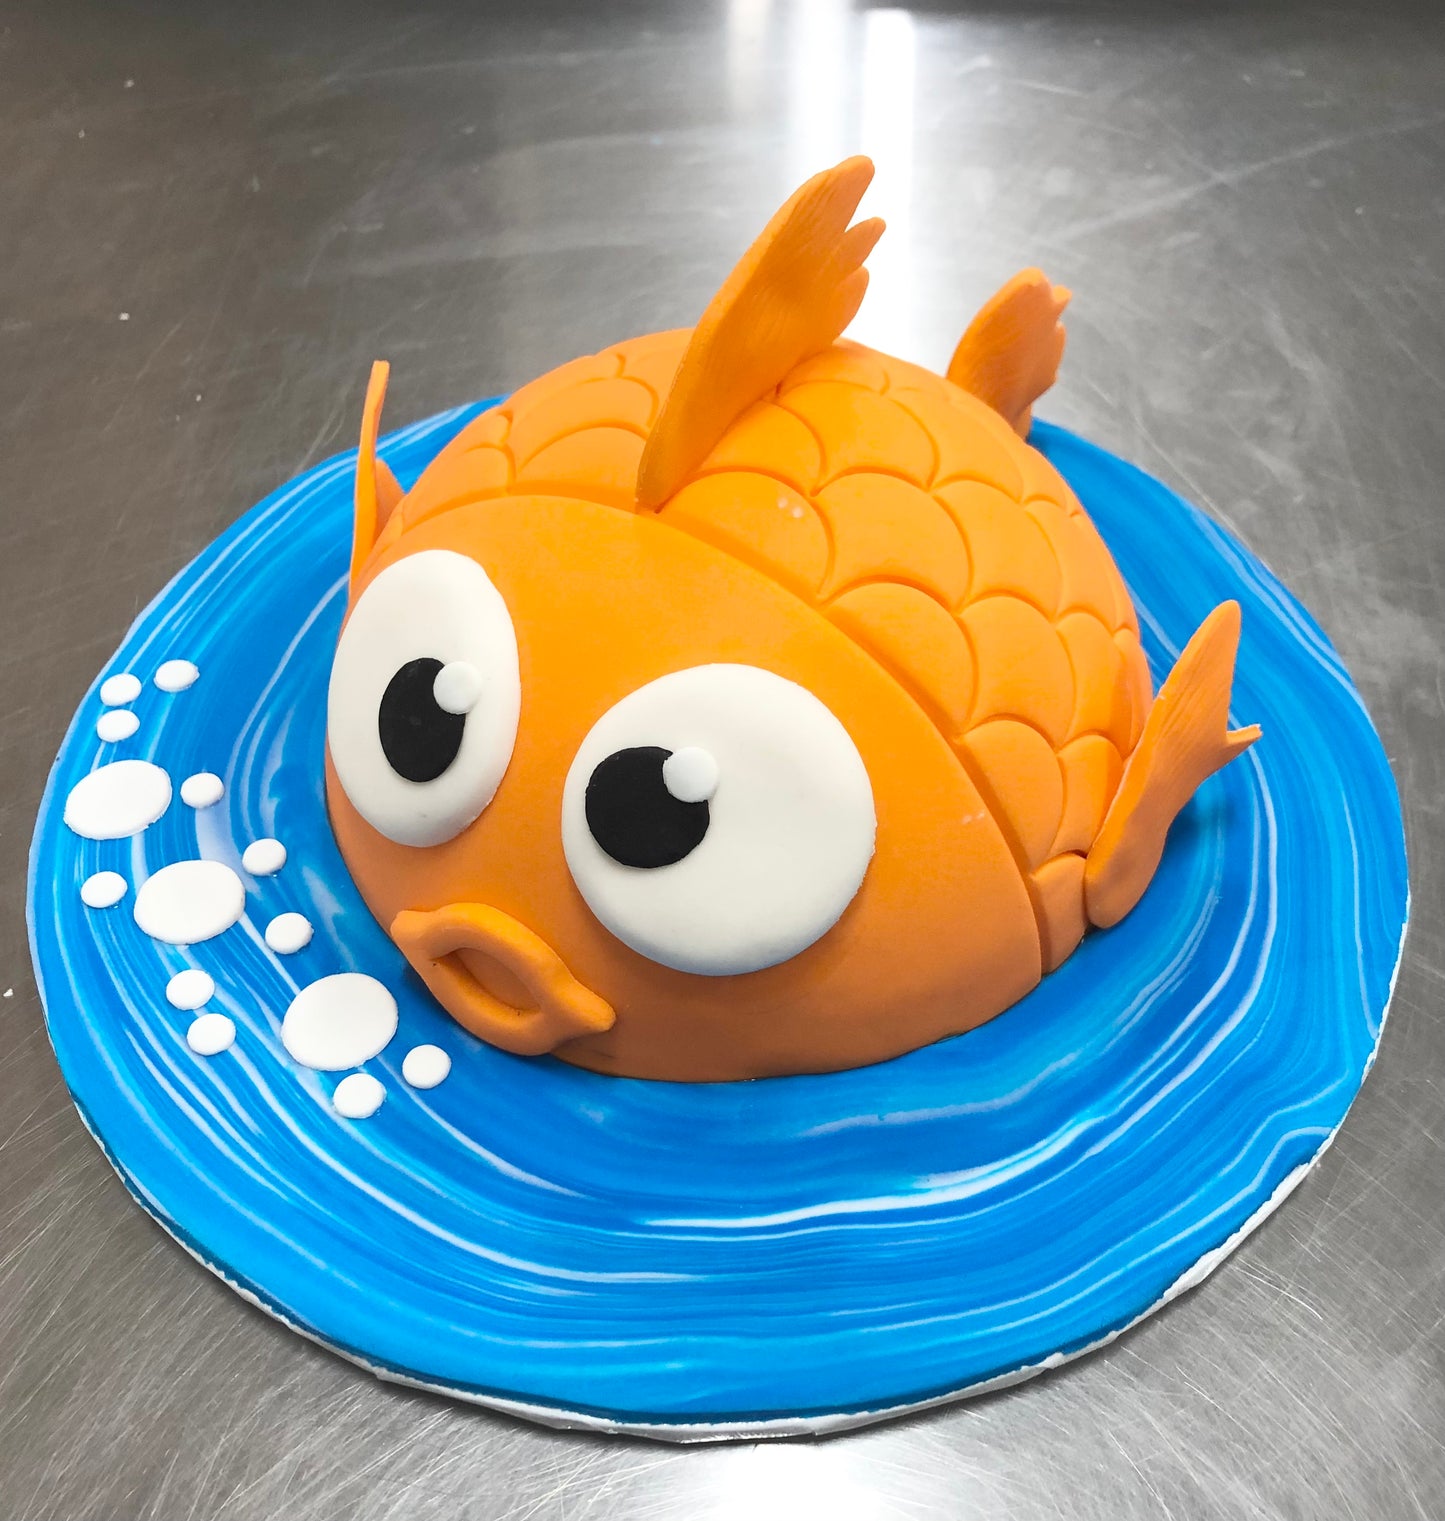 Cake in the box - Bubbly Fish - Add on kit